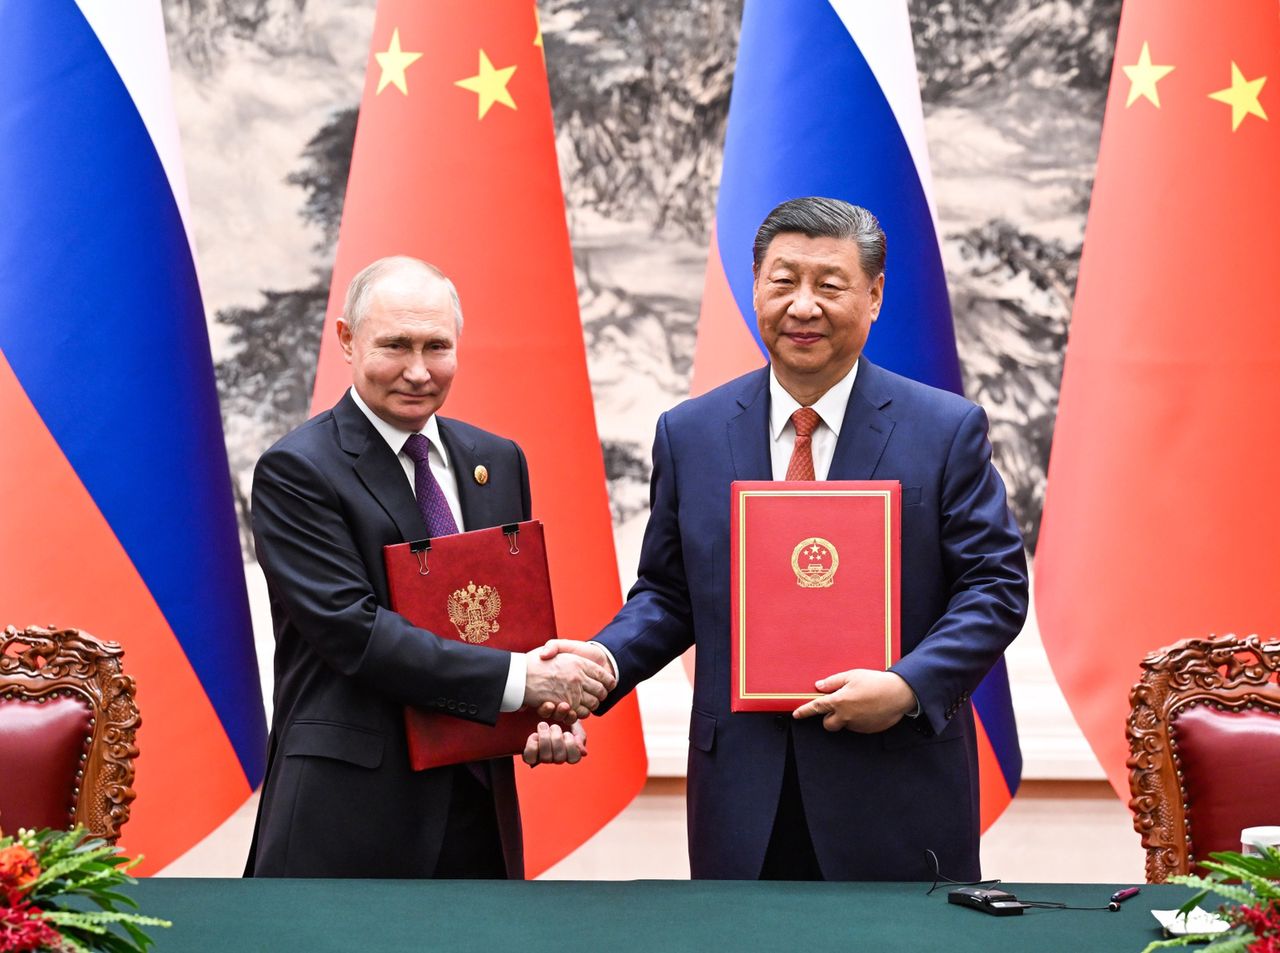 Putin found an idea for sanctions. He wants to sell oil and gas to China.